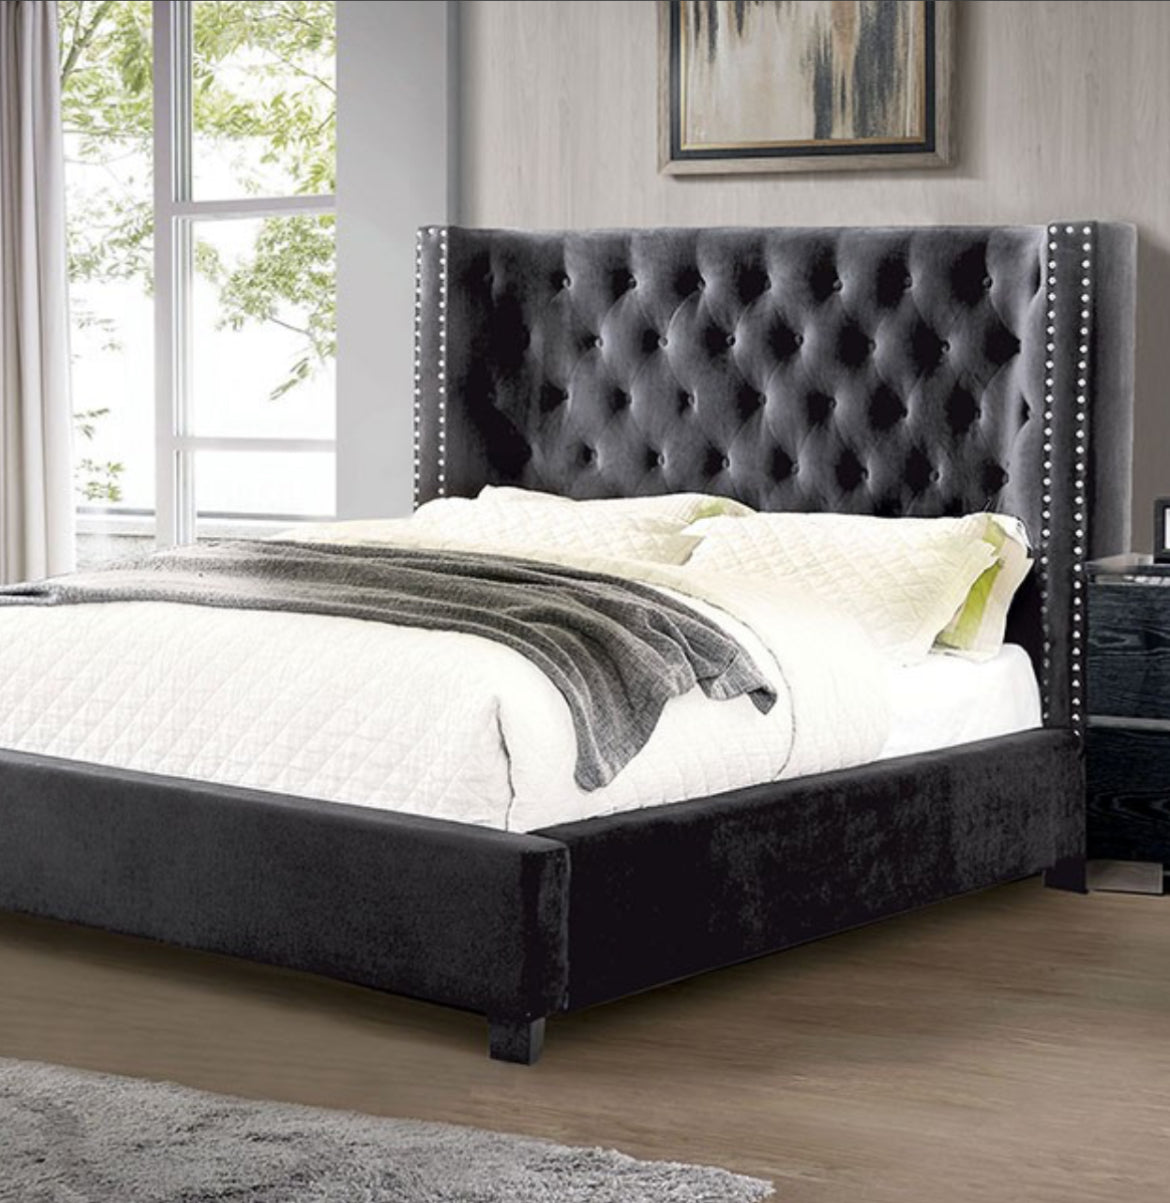 CAL KING OR QUEEN BED FRAME